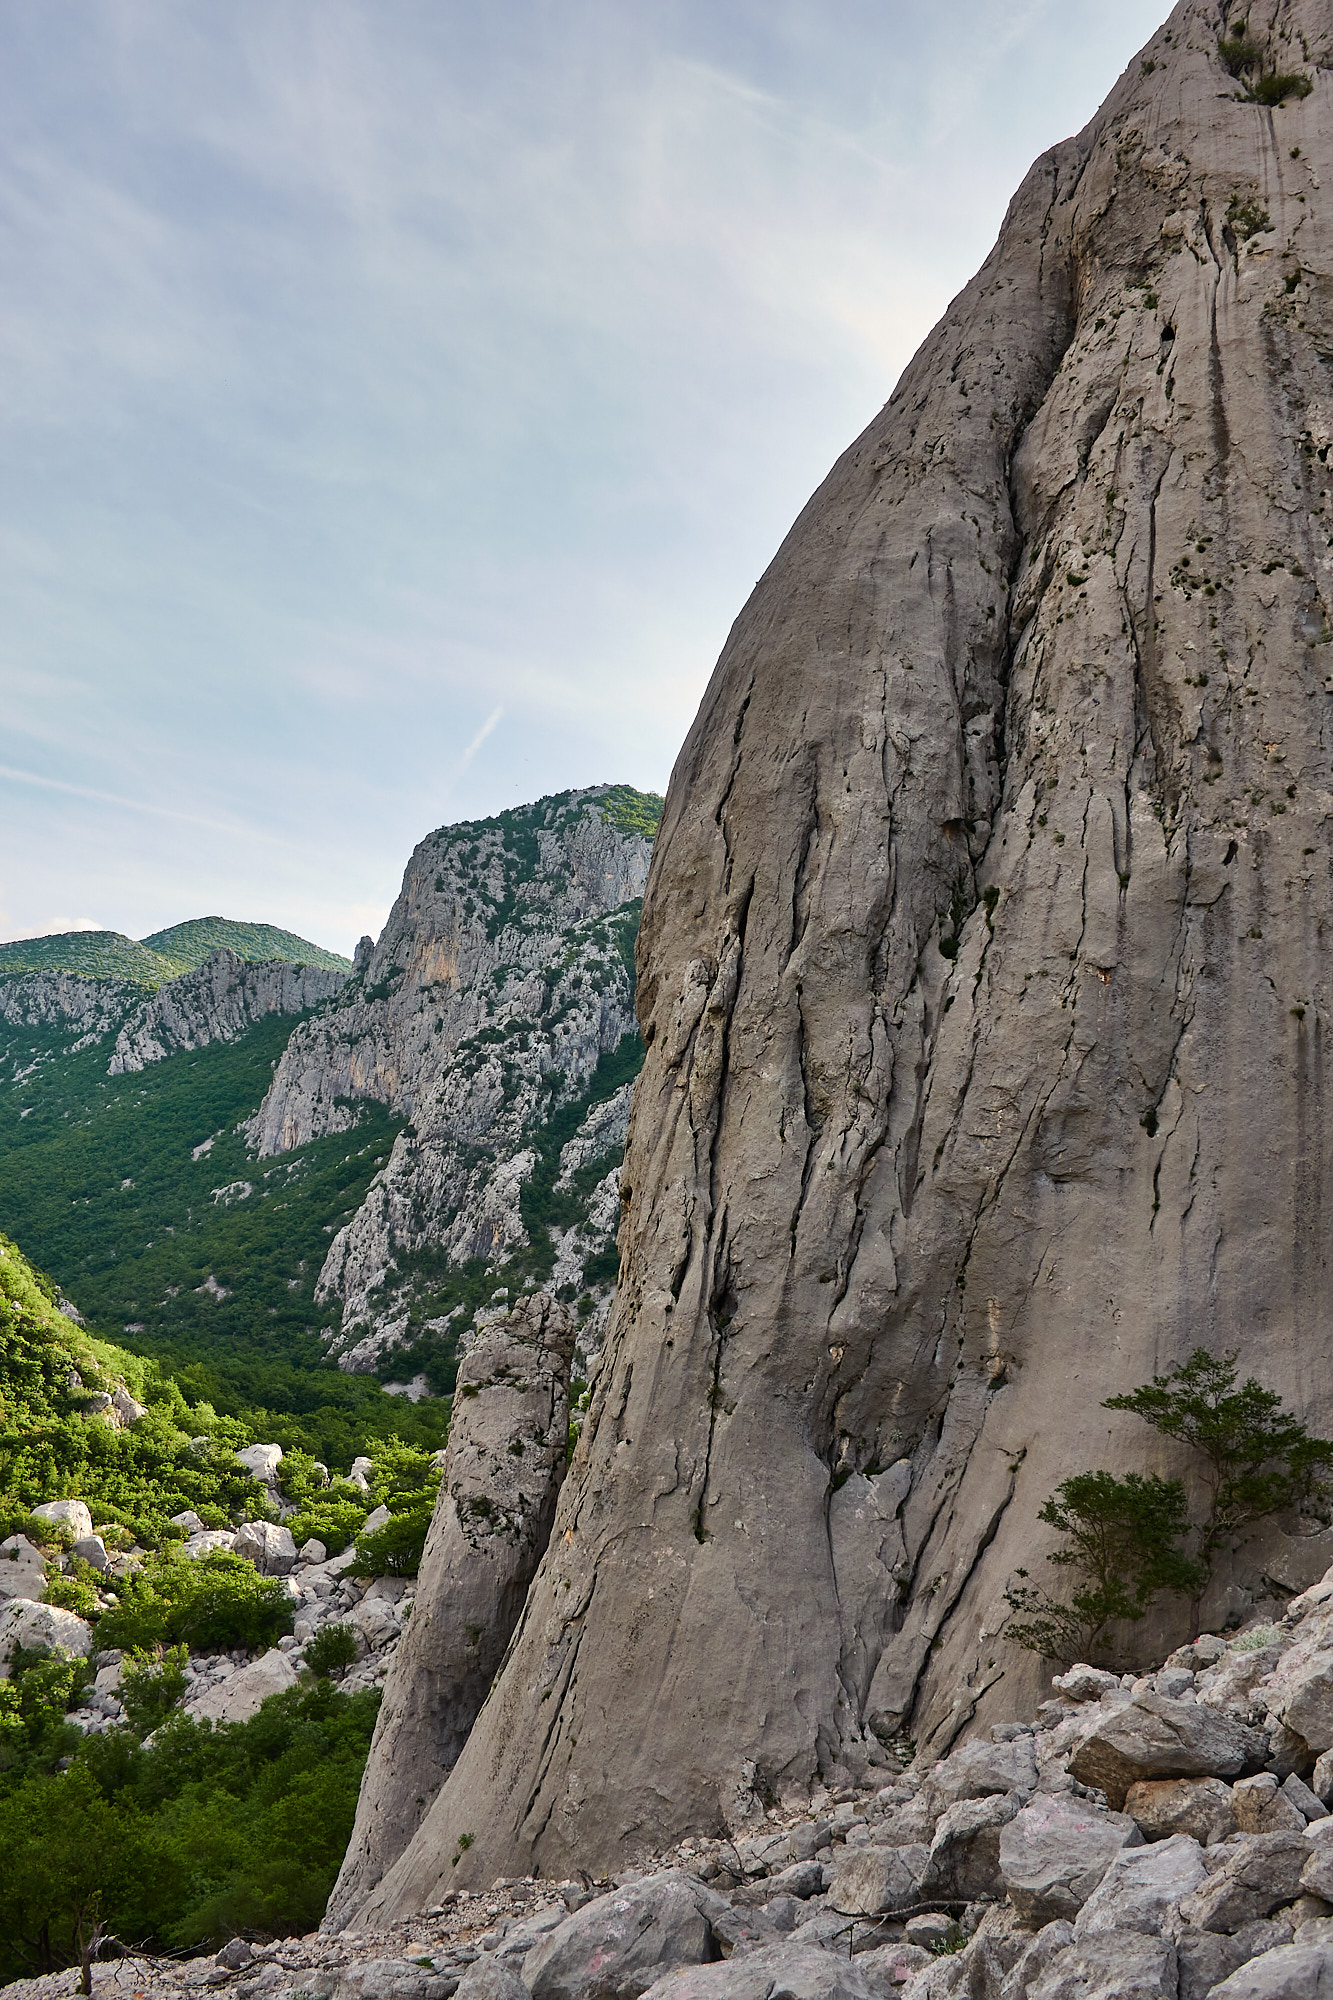 A view of a large limestone buttress called Stup on Anica Kuk in the Paklenica gorge in Croatia